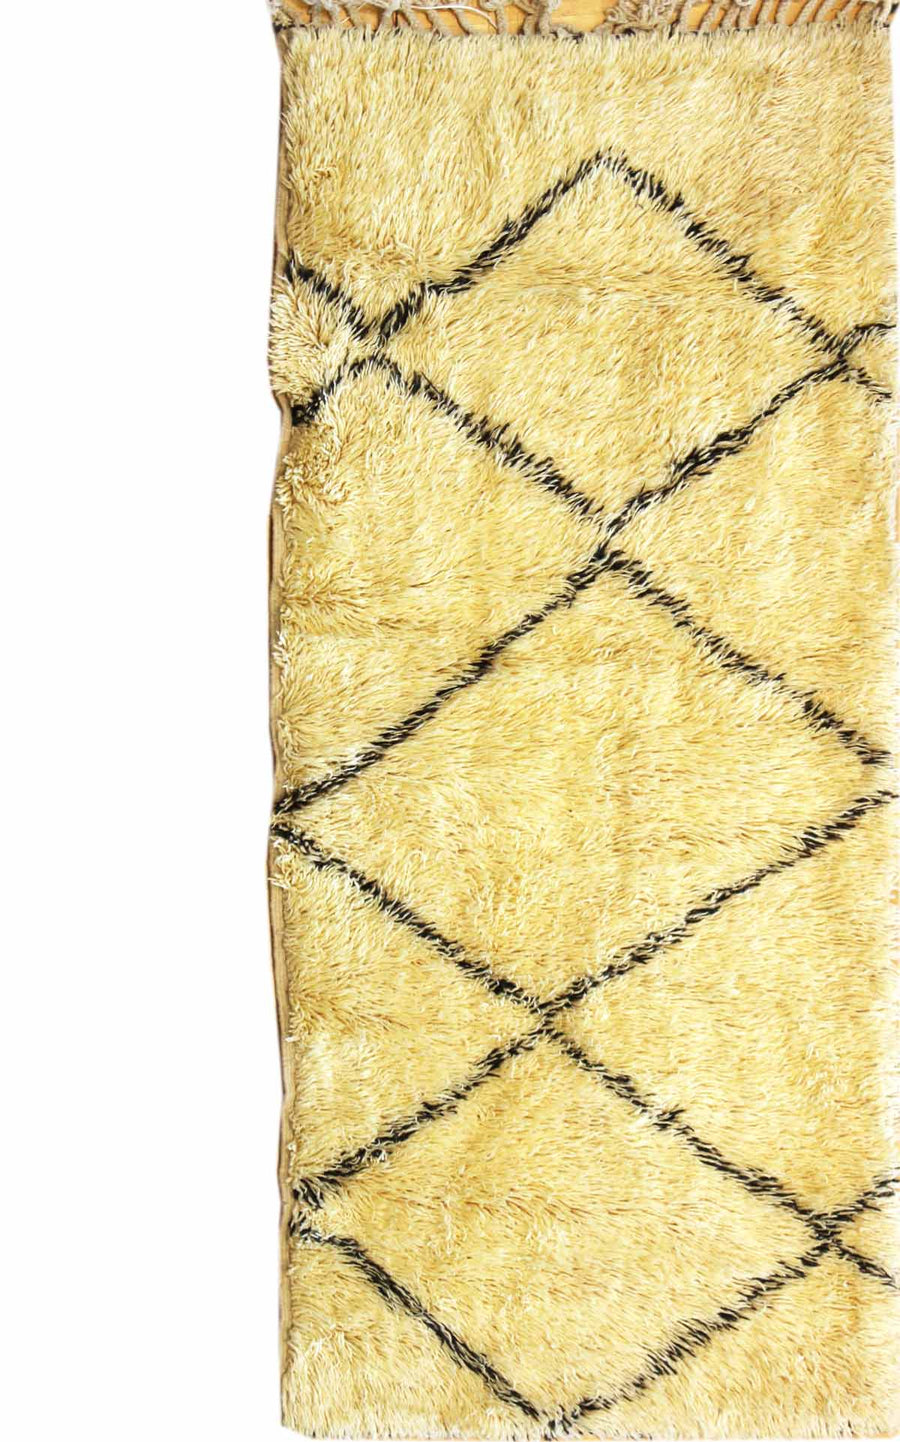 BENI OURAINE HANDKNOTTED RUG, J38338